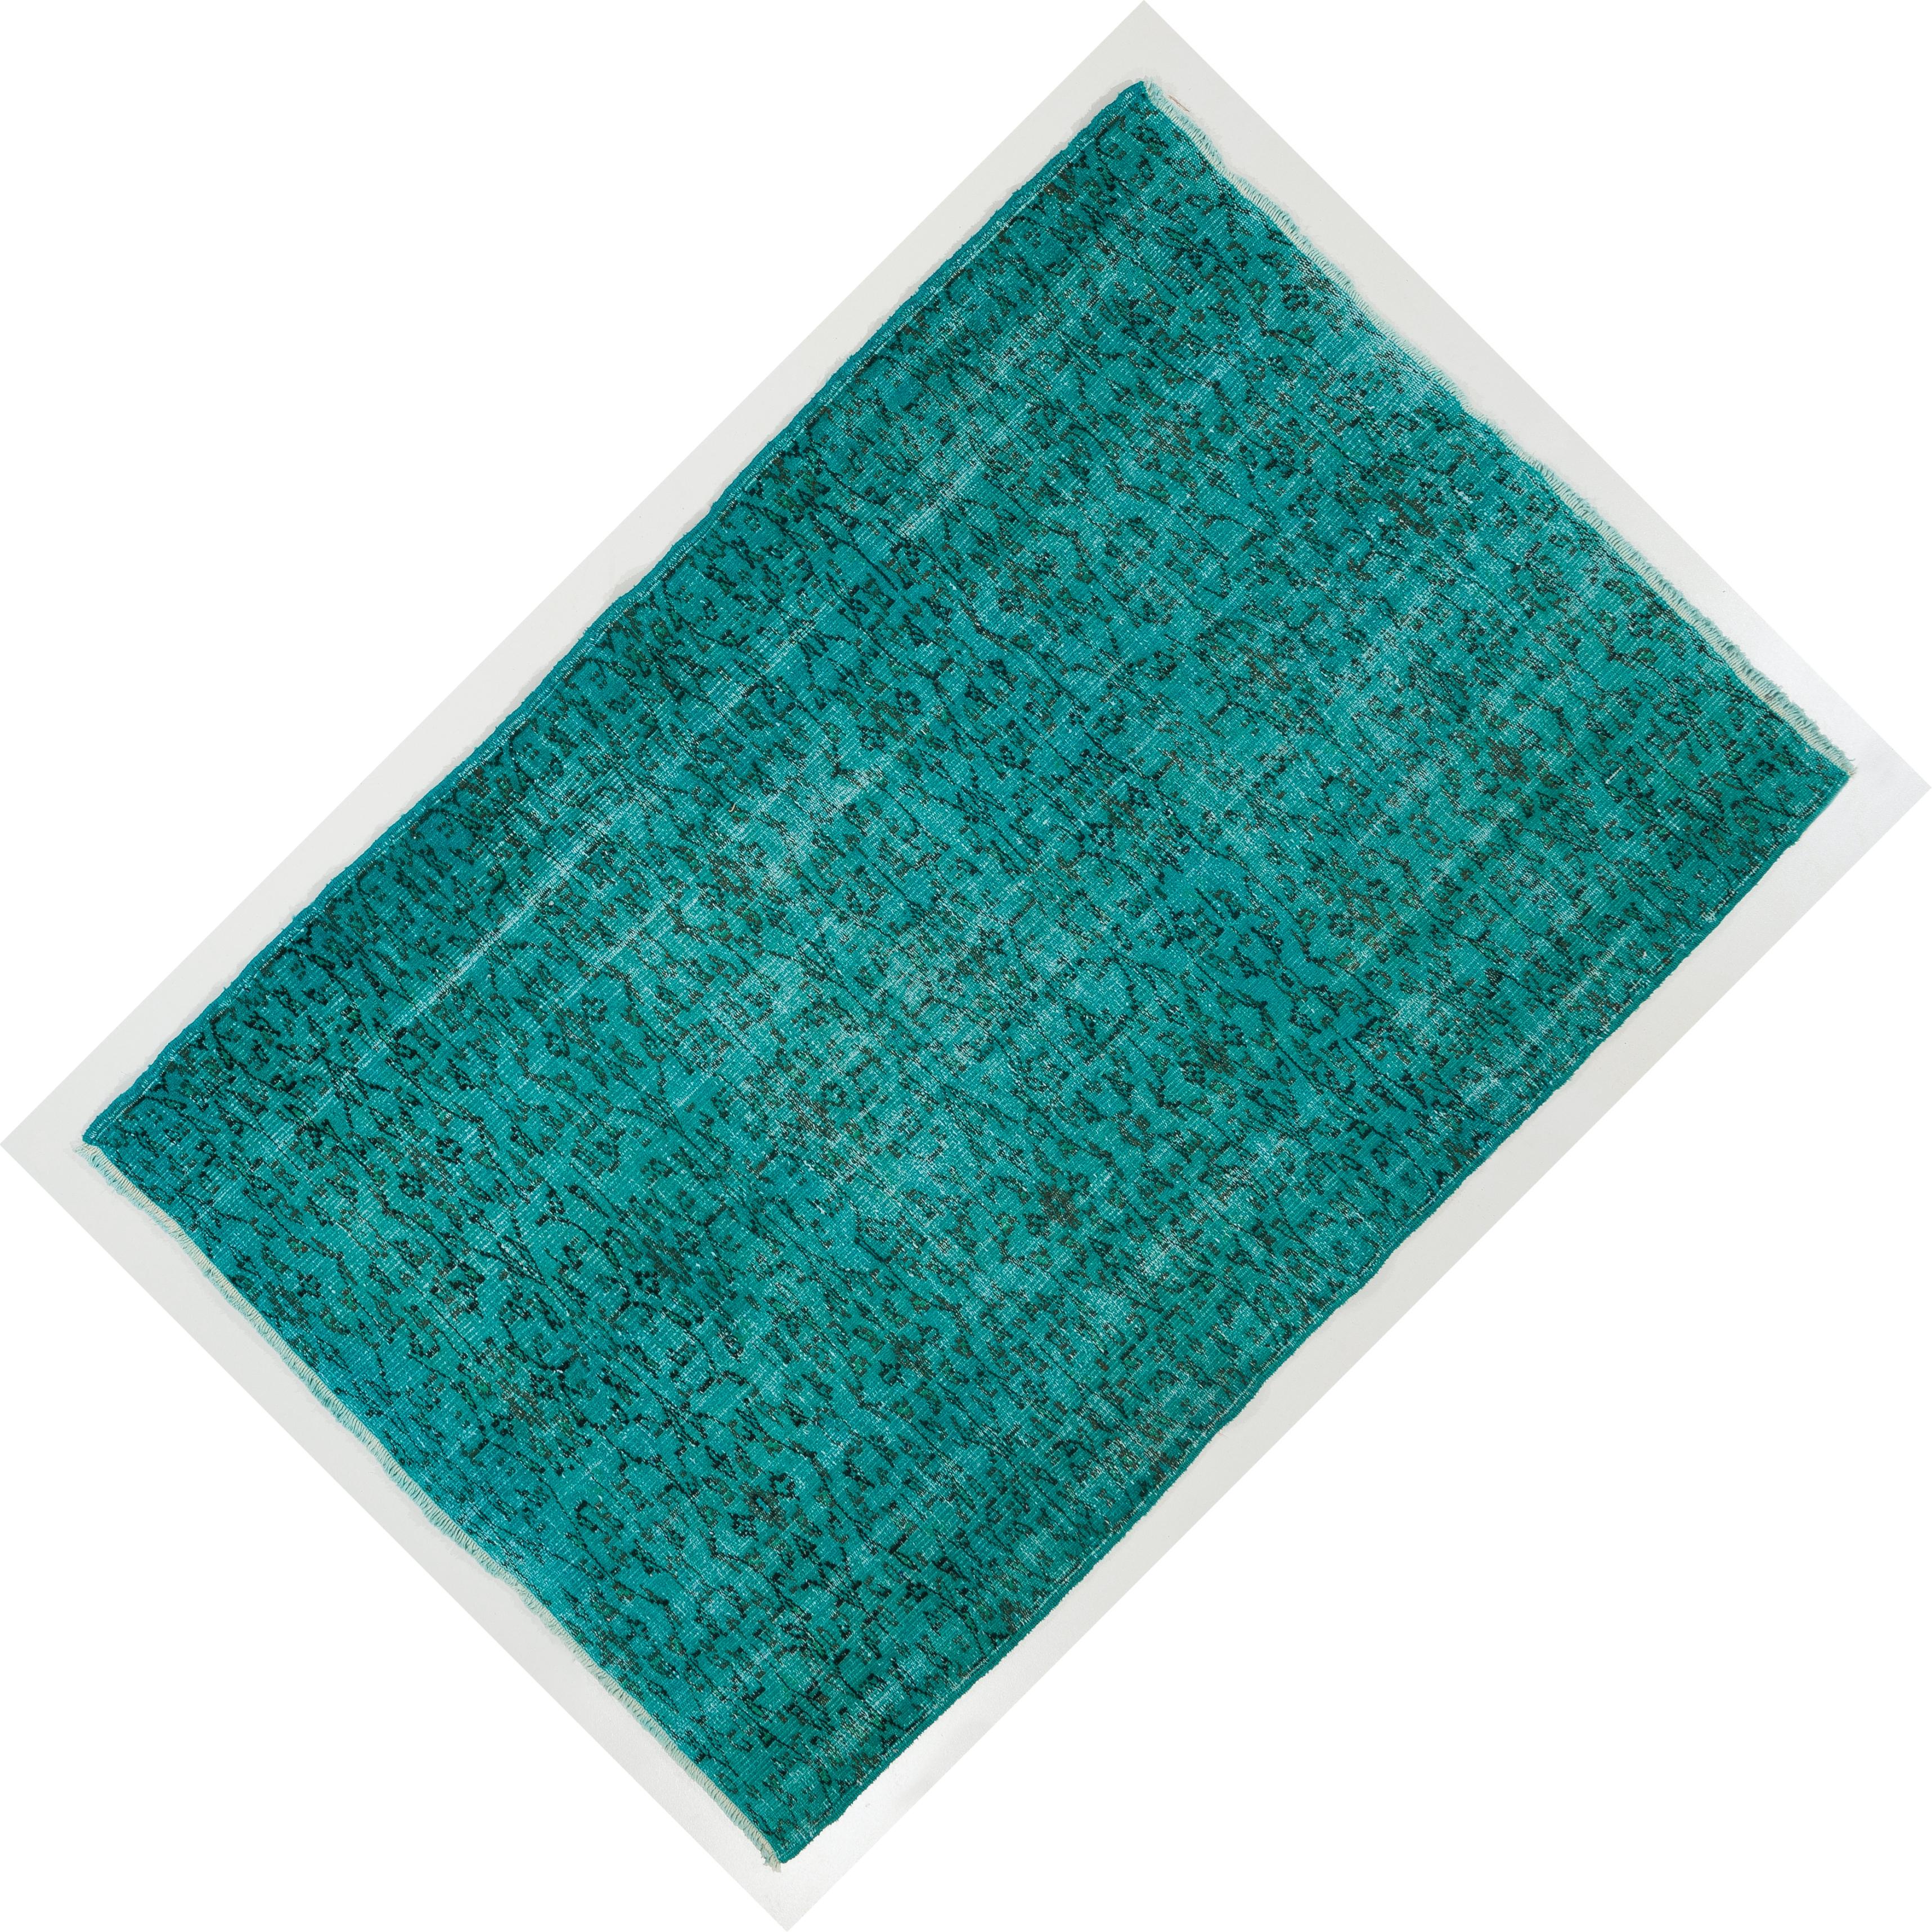 Hand-Woven 5x7.4 Ft Handmade Vintage Turkish Floral Rug in Teal Blue 4 Modern Interiors